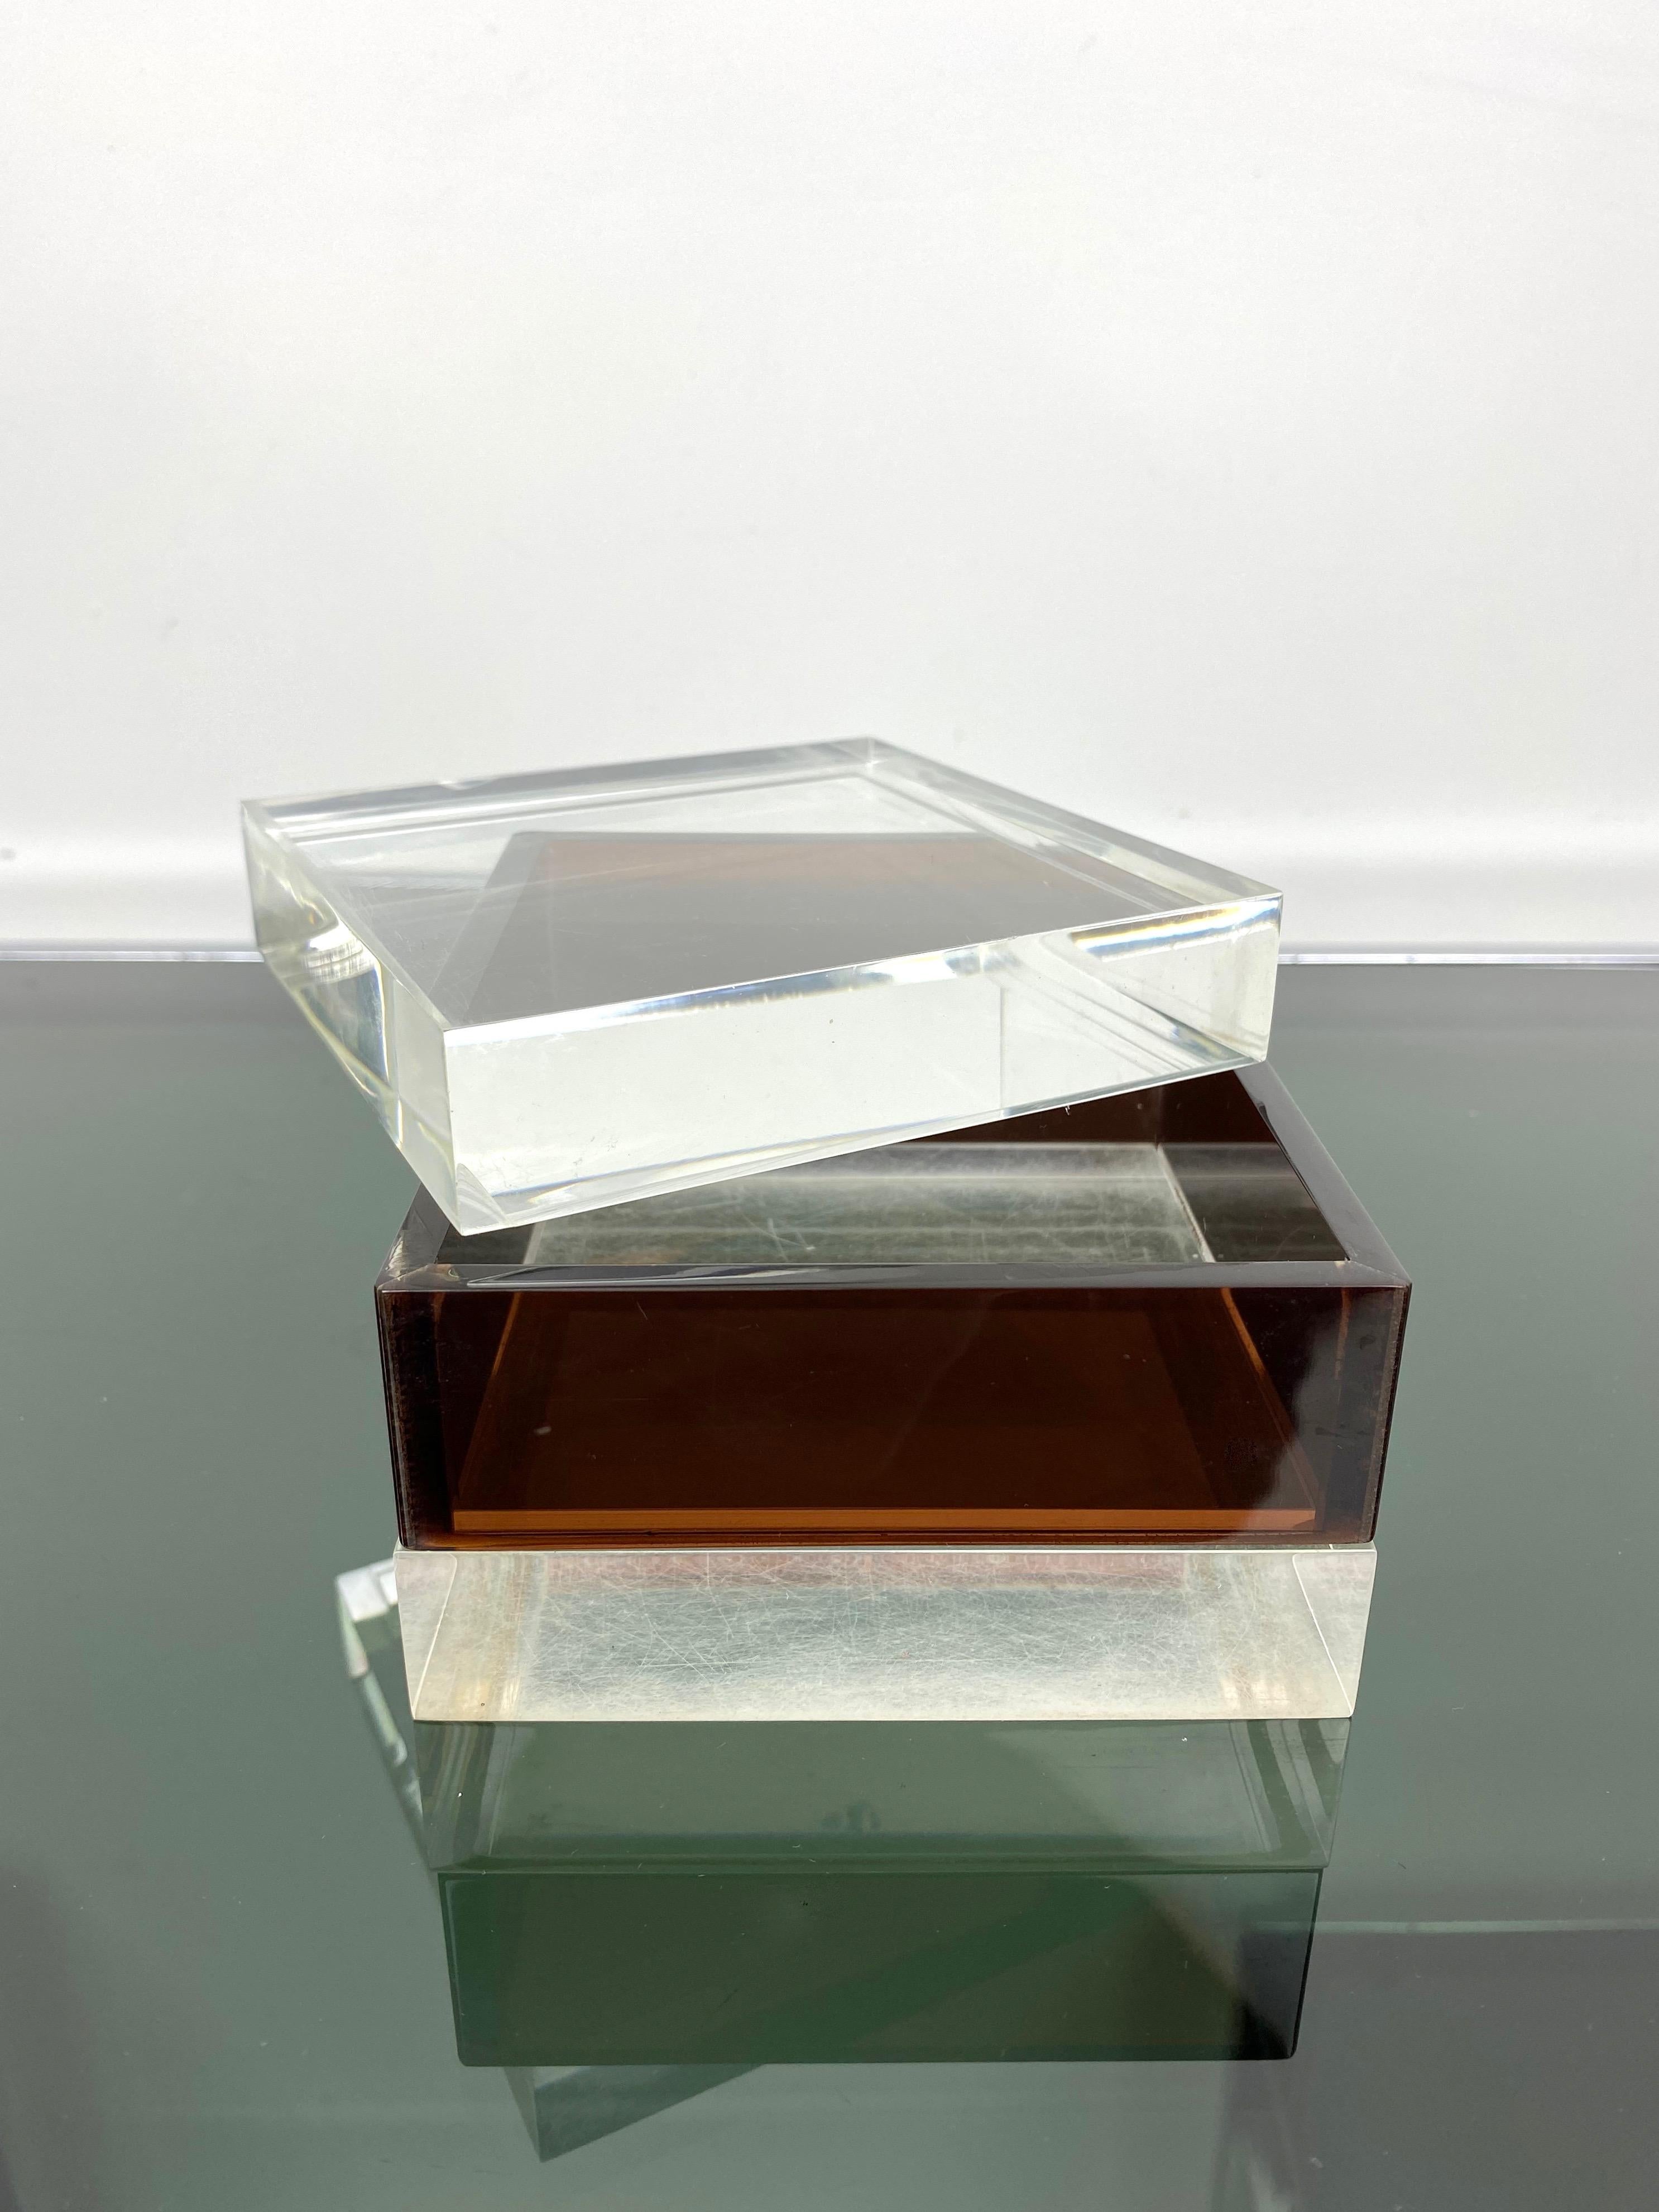 Late 20th Century Cube Box in Lucite Alessandro Albrizzi Style, Italy, Mid-Century Modern, 1970s For Sale